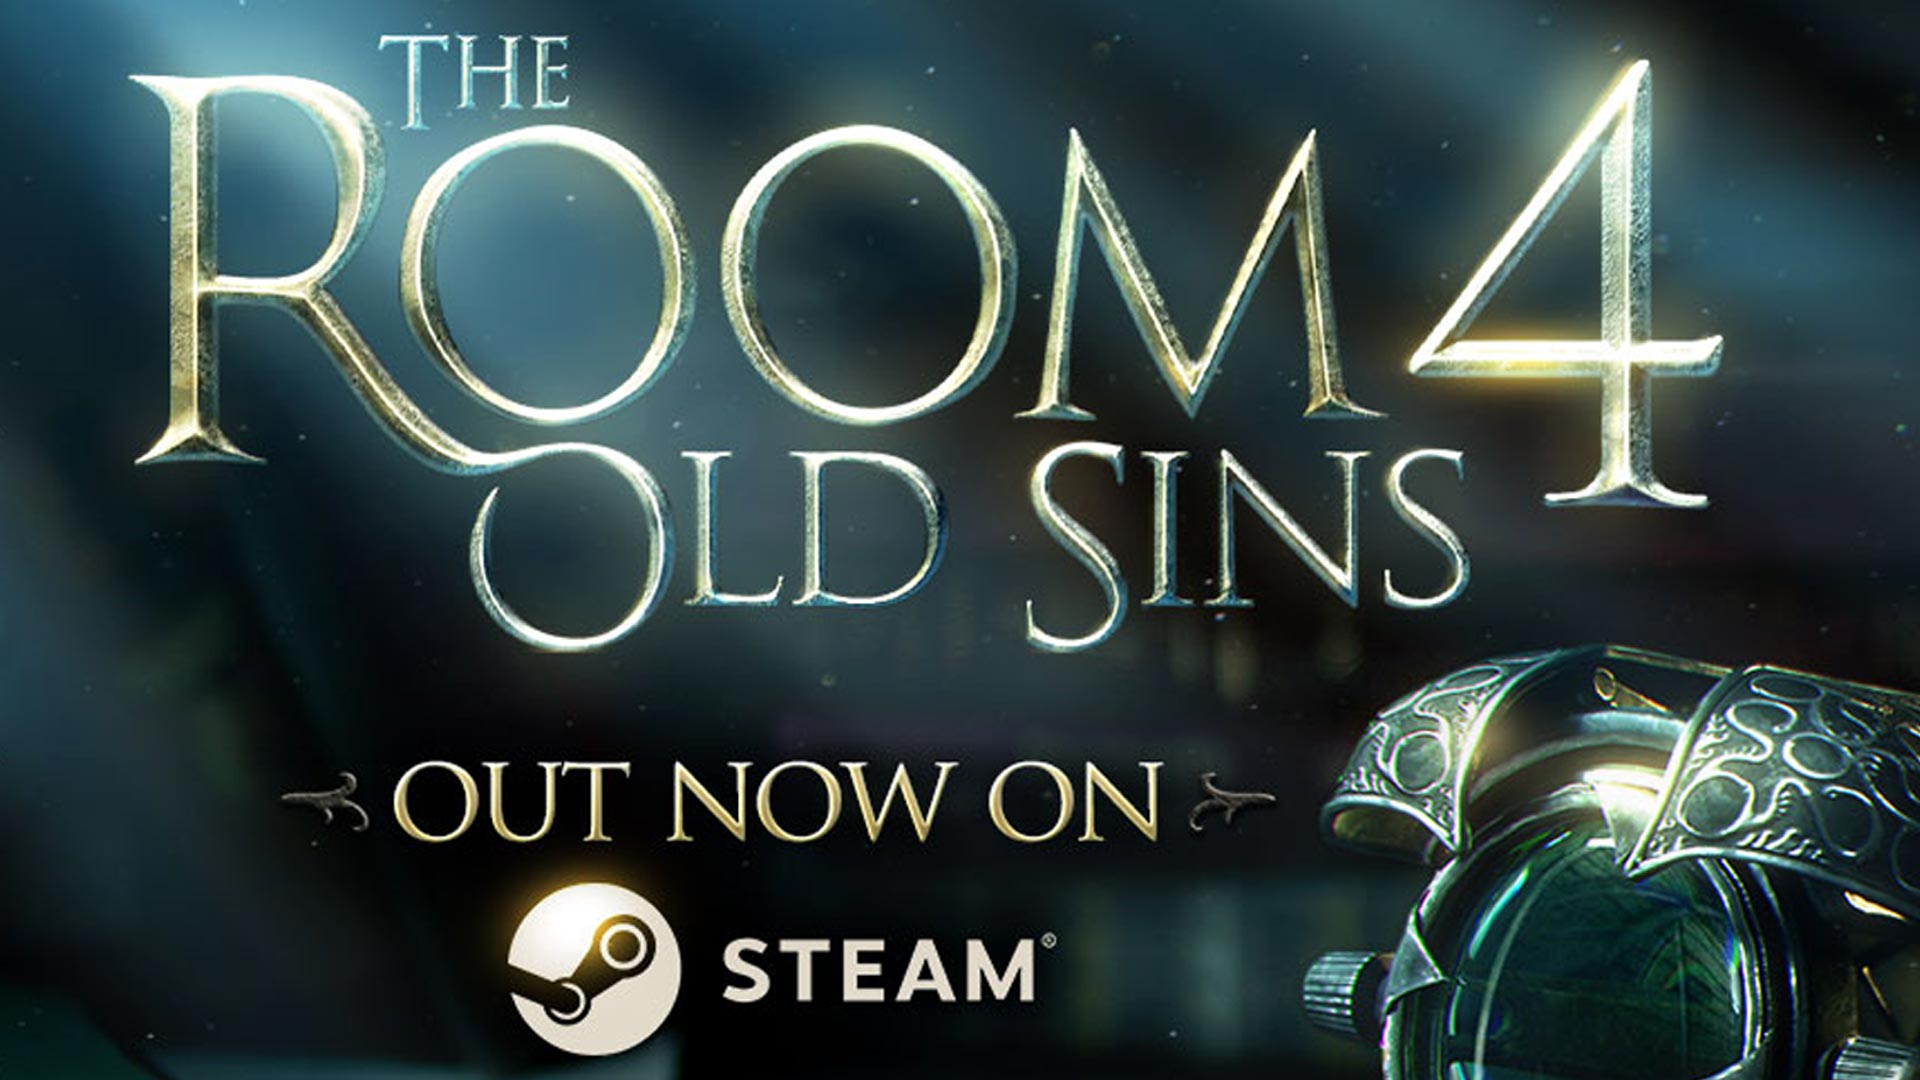 download free the room old sins